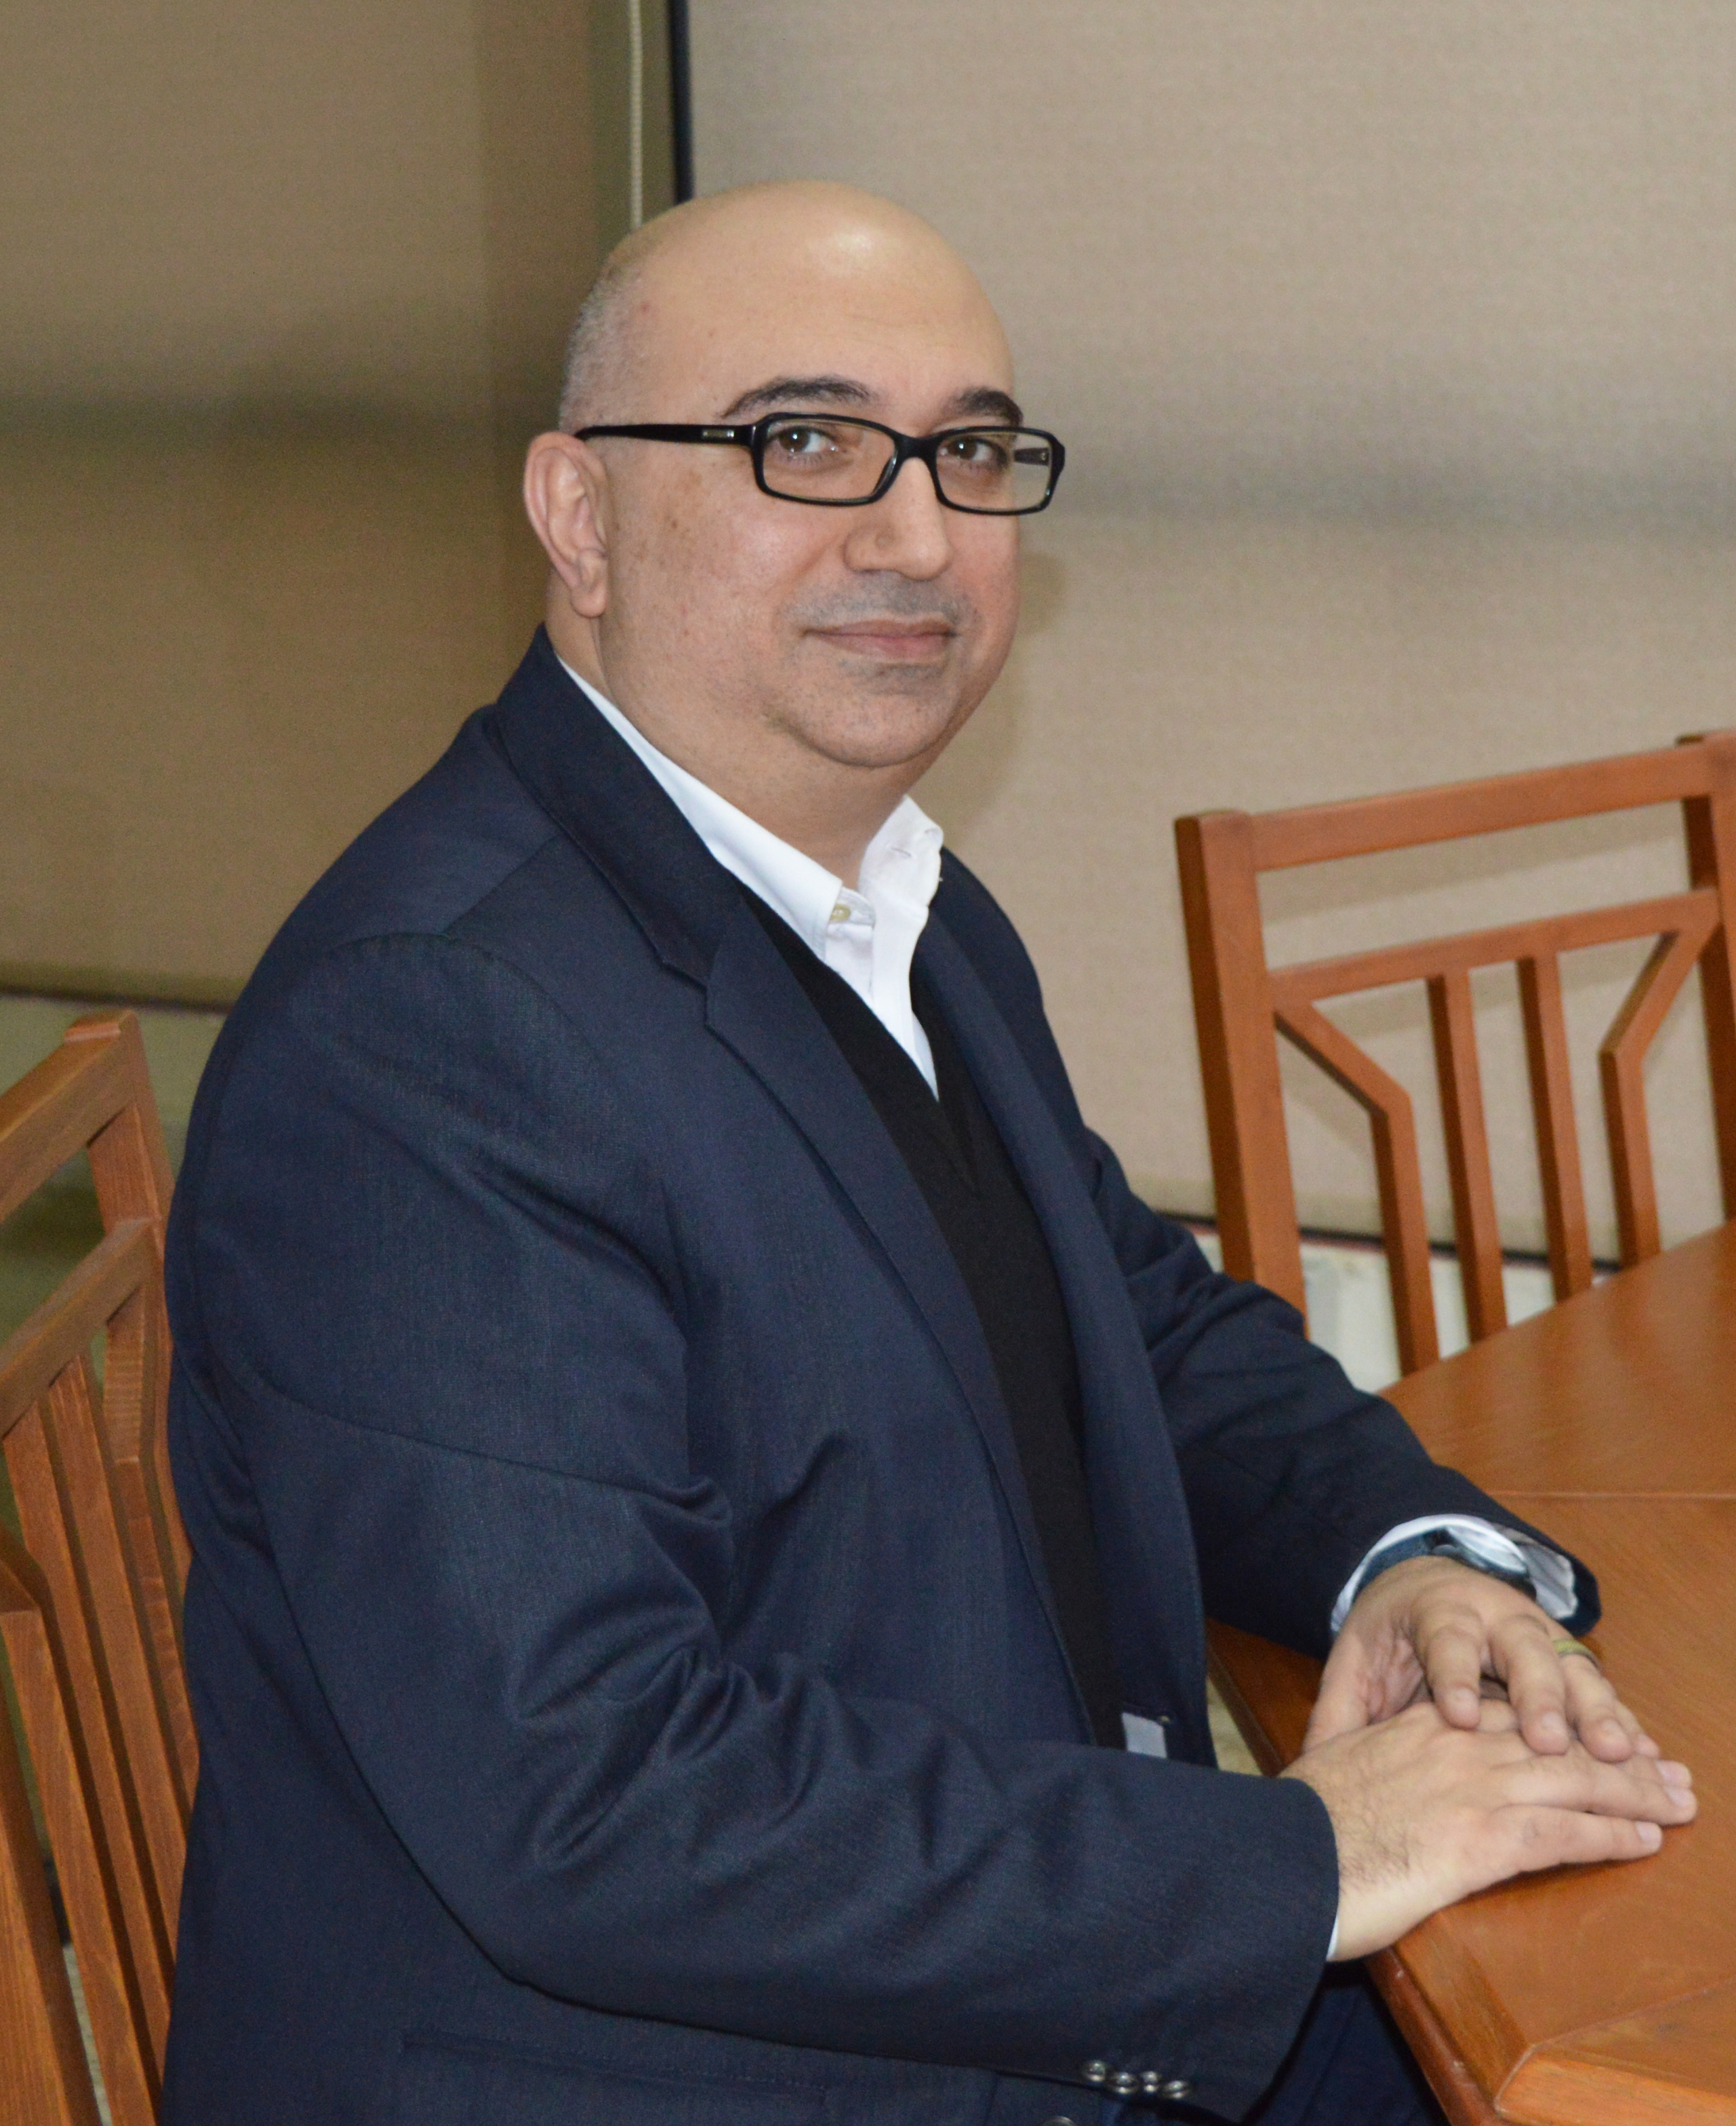 The Appointment of Professor Andre Azouri as Acting Dean of the International School of Business at MUBS